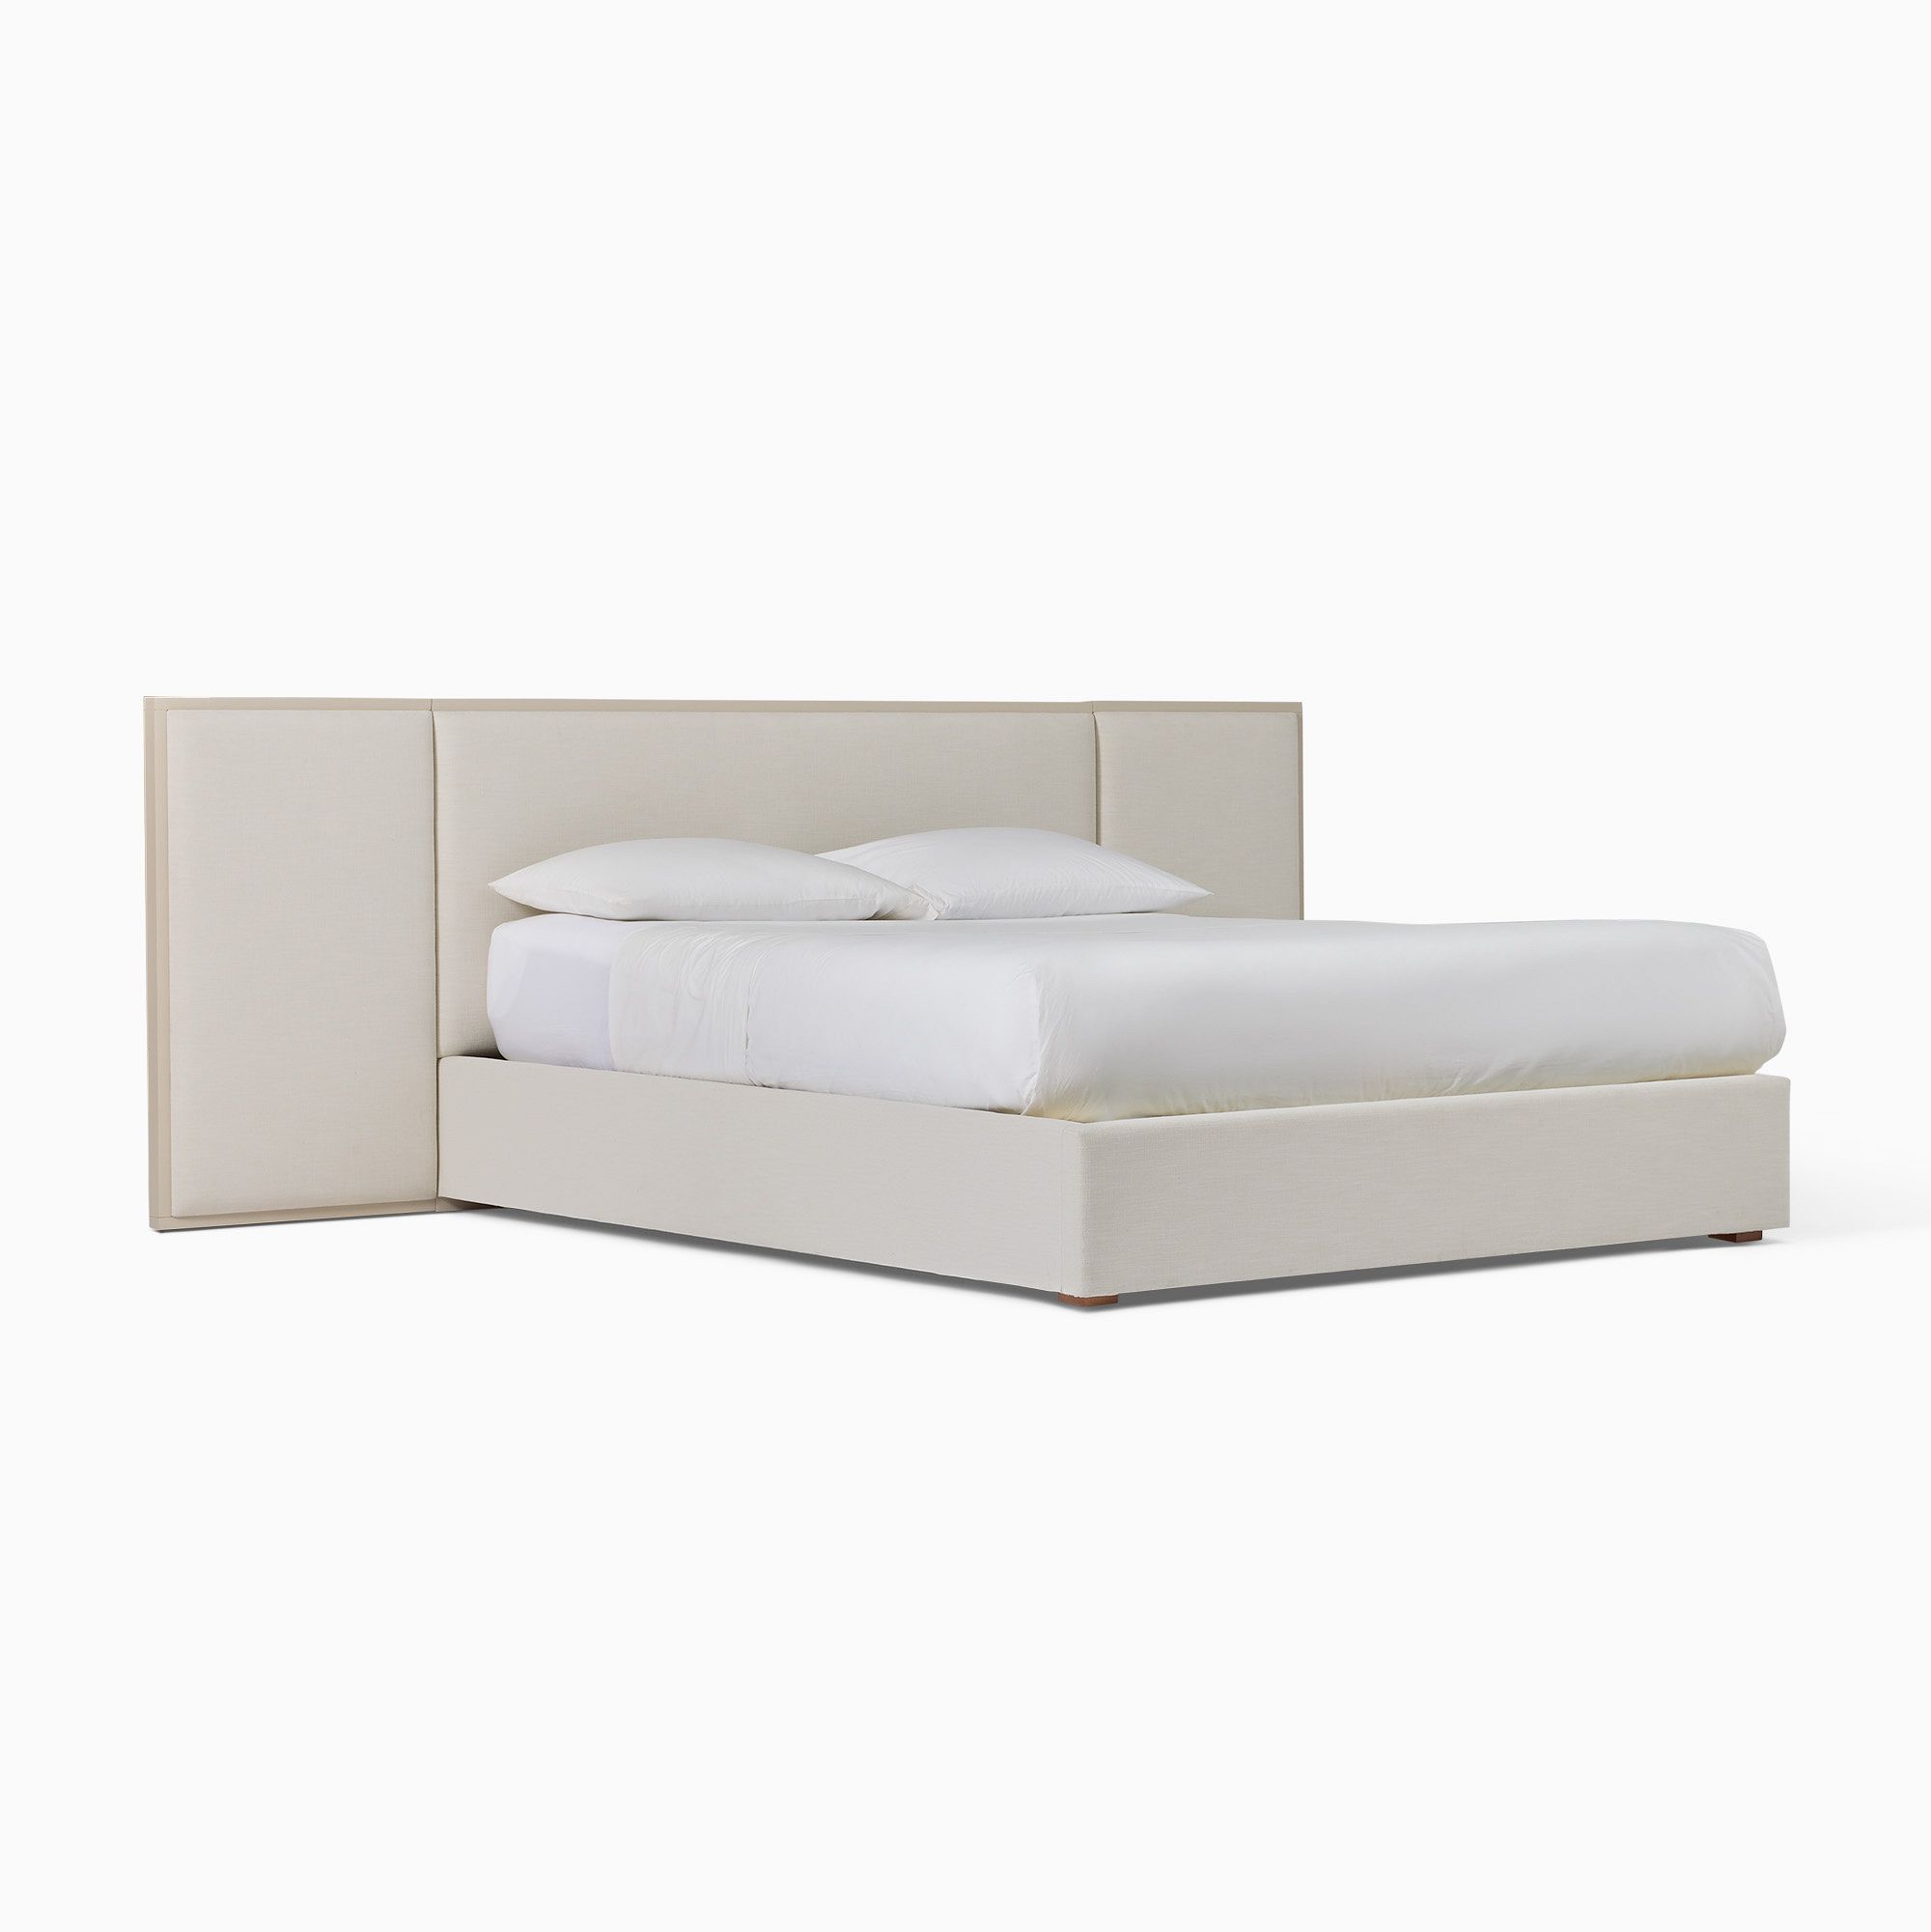 Billy Cotton Deluxe Bed | West Elm